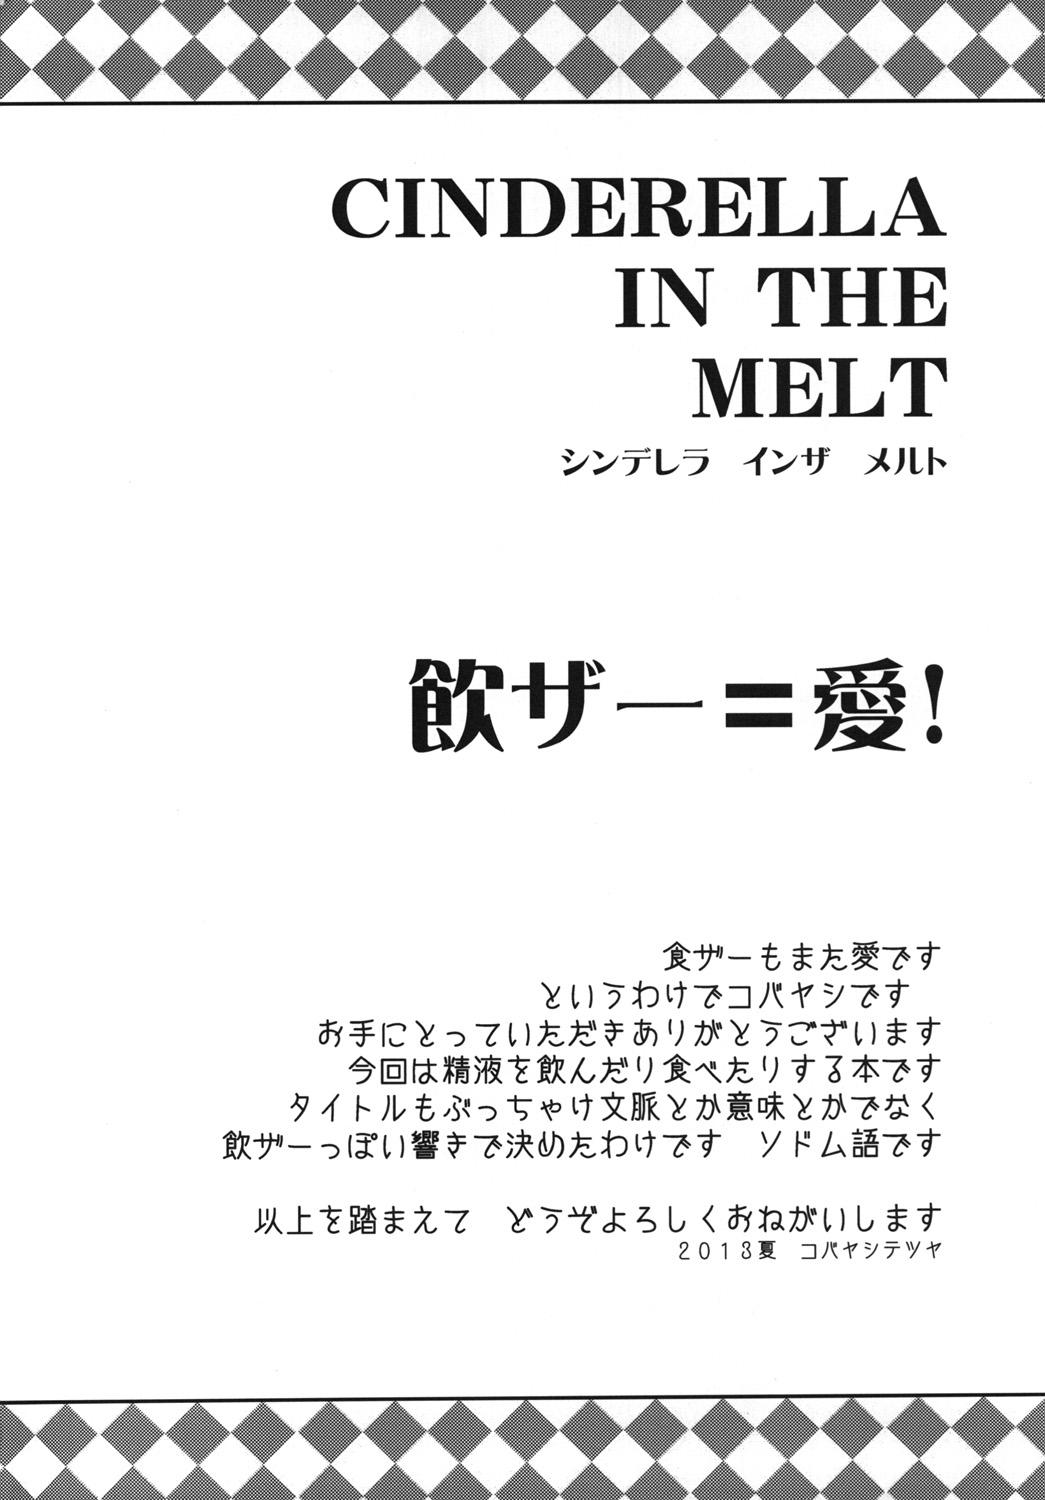 Con CINDERELLA IN THE MELT - The idolmaster Freak - Page 3